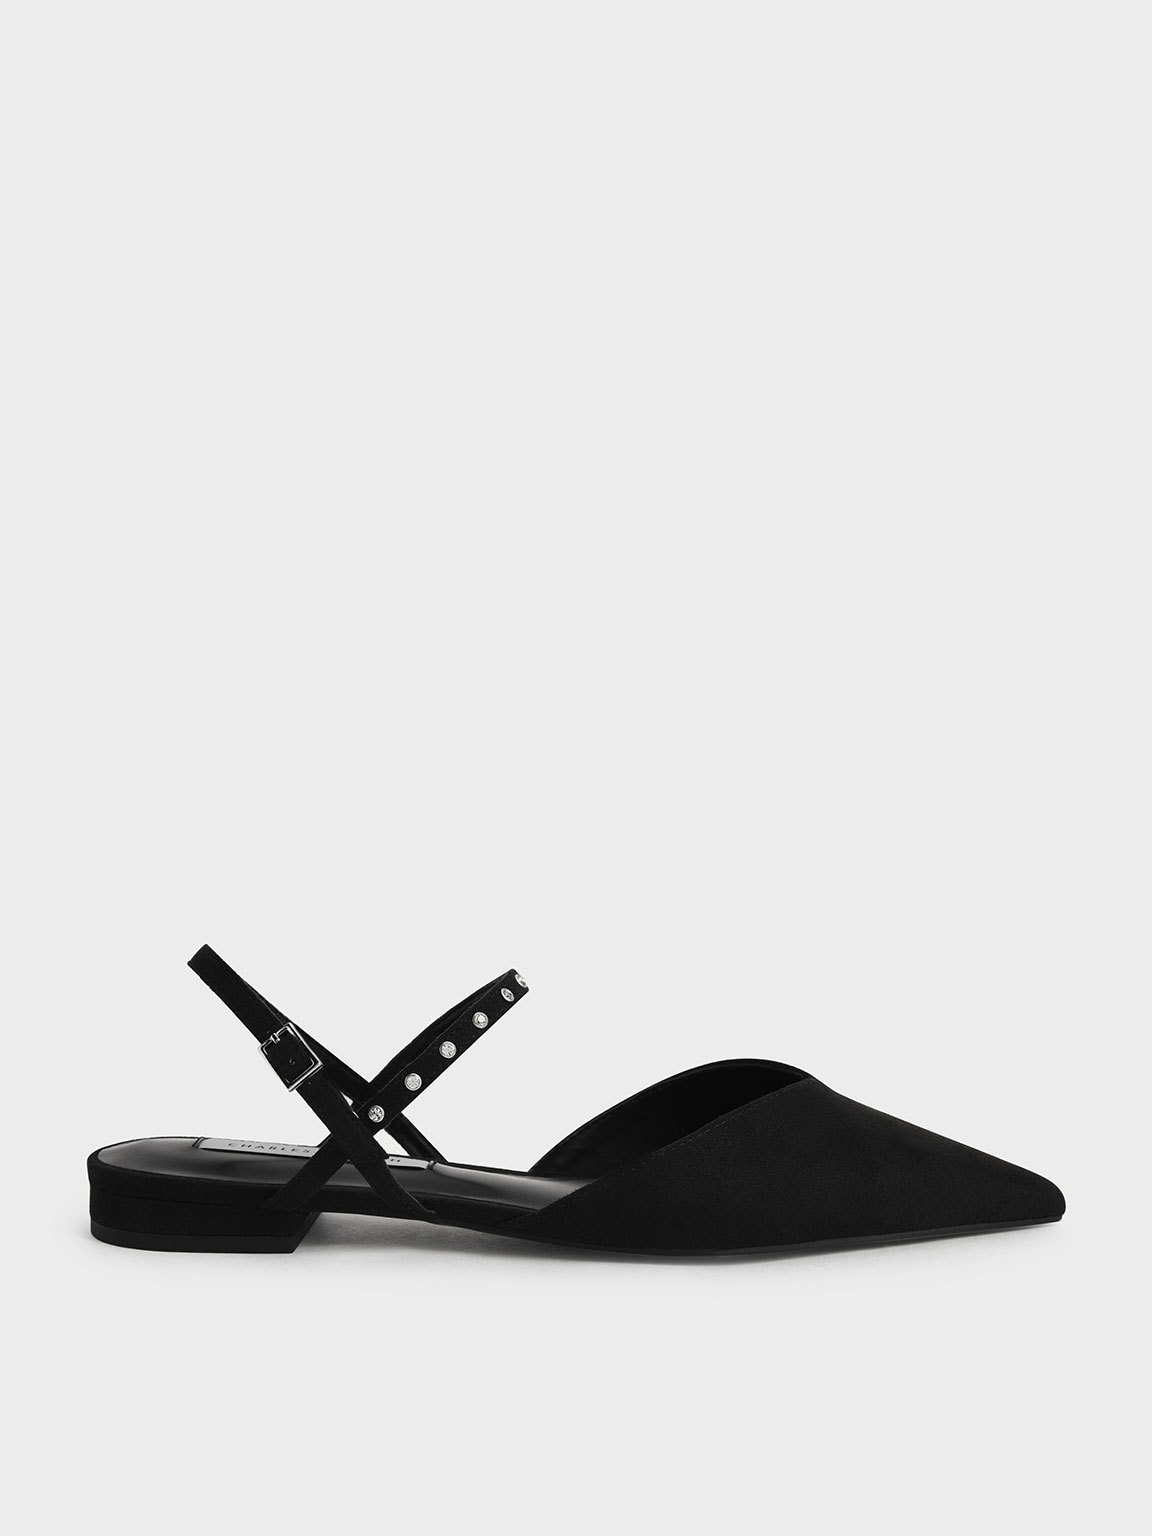 Black Studded Ankle Strap Ballerina Flats - CHARLES & KEITH ID